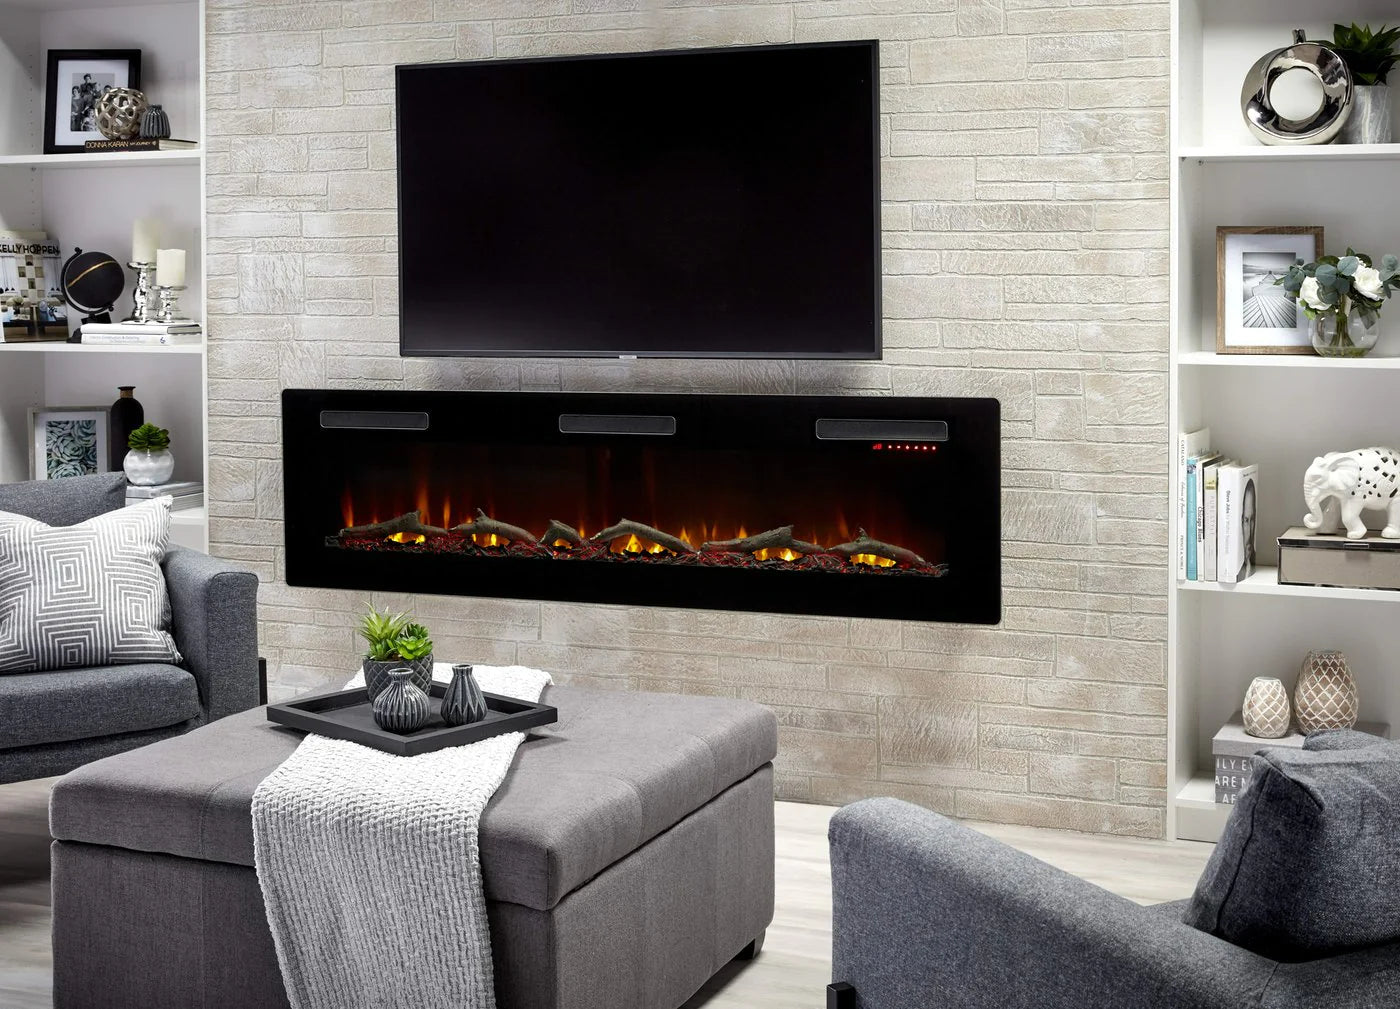 Dimplex - Sierra 48", 60", 72" Wall-mounted/Built-In Linear Electric Fireplace | Fireplace Trends